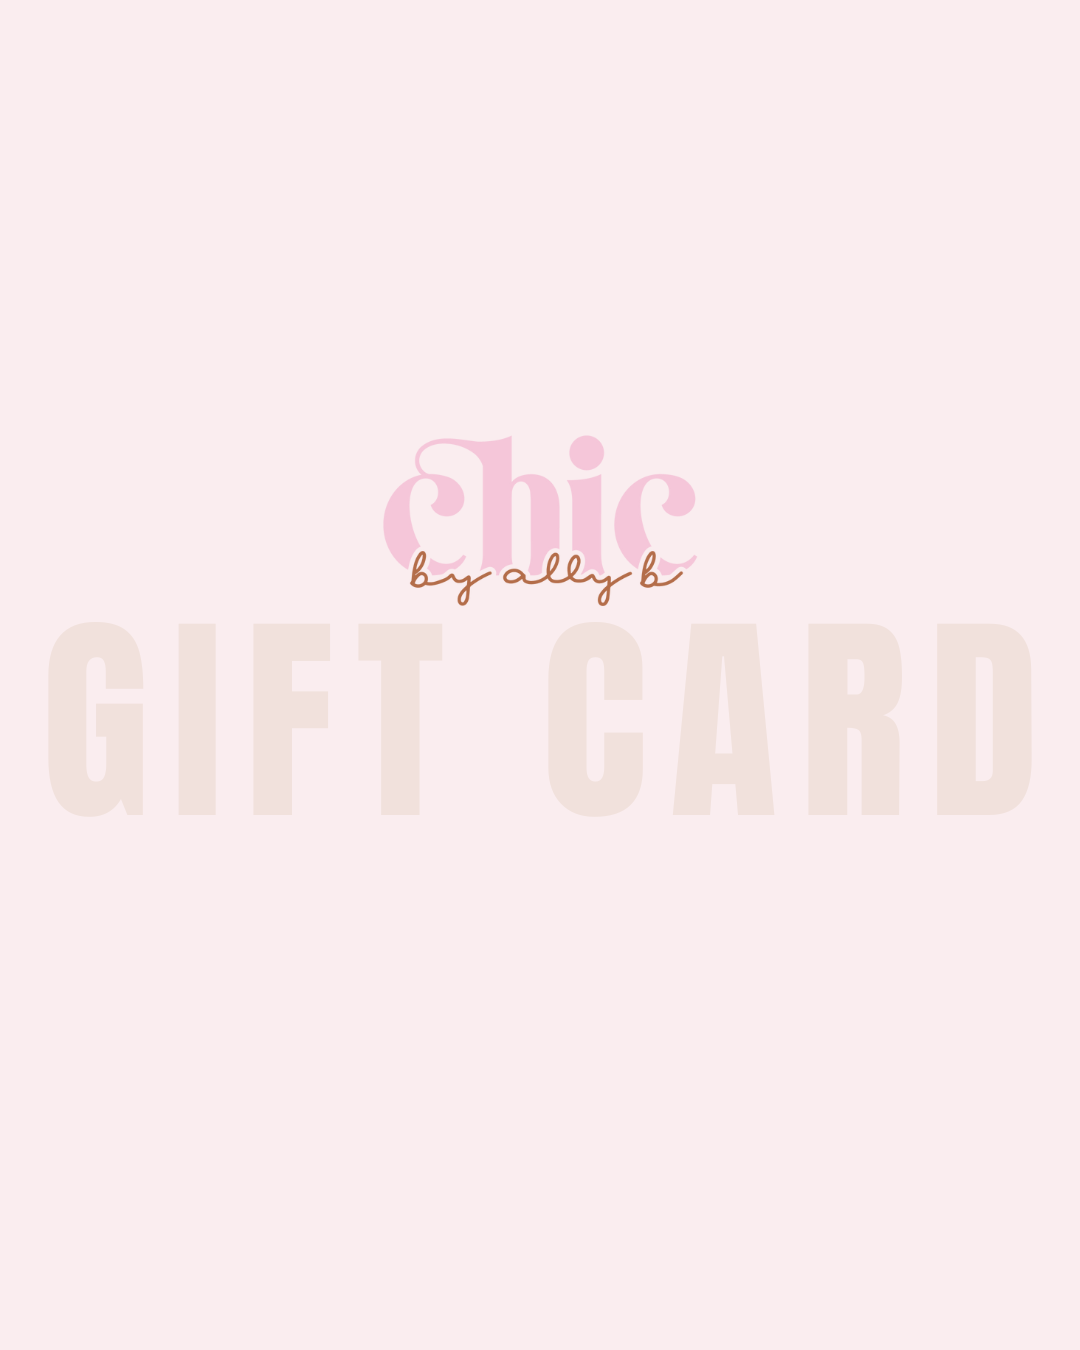 Chic by Ally B Gift Card